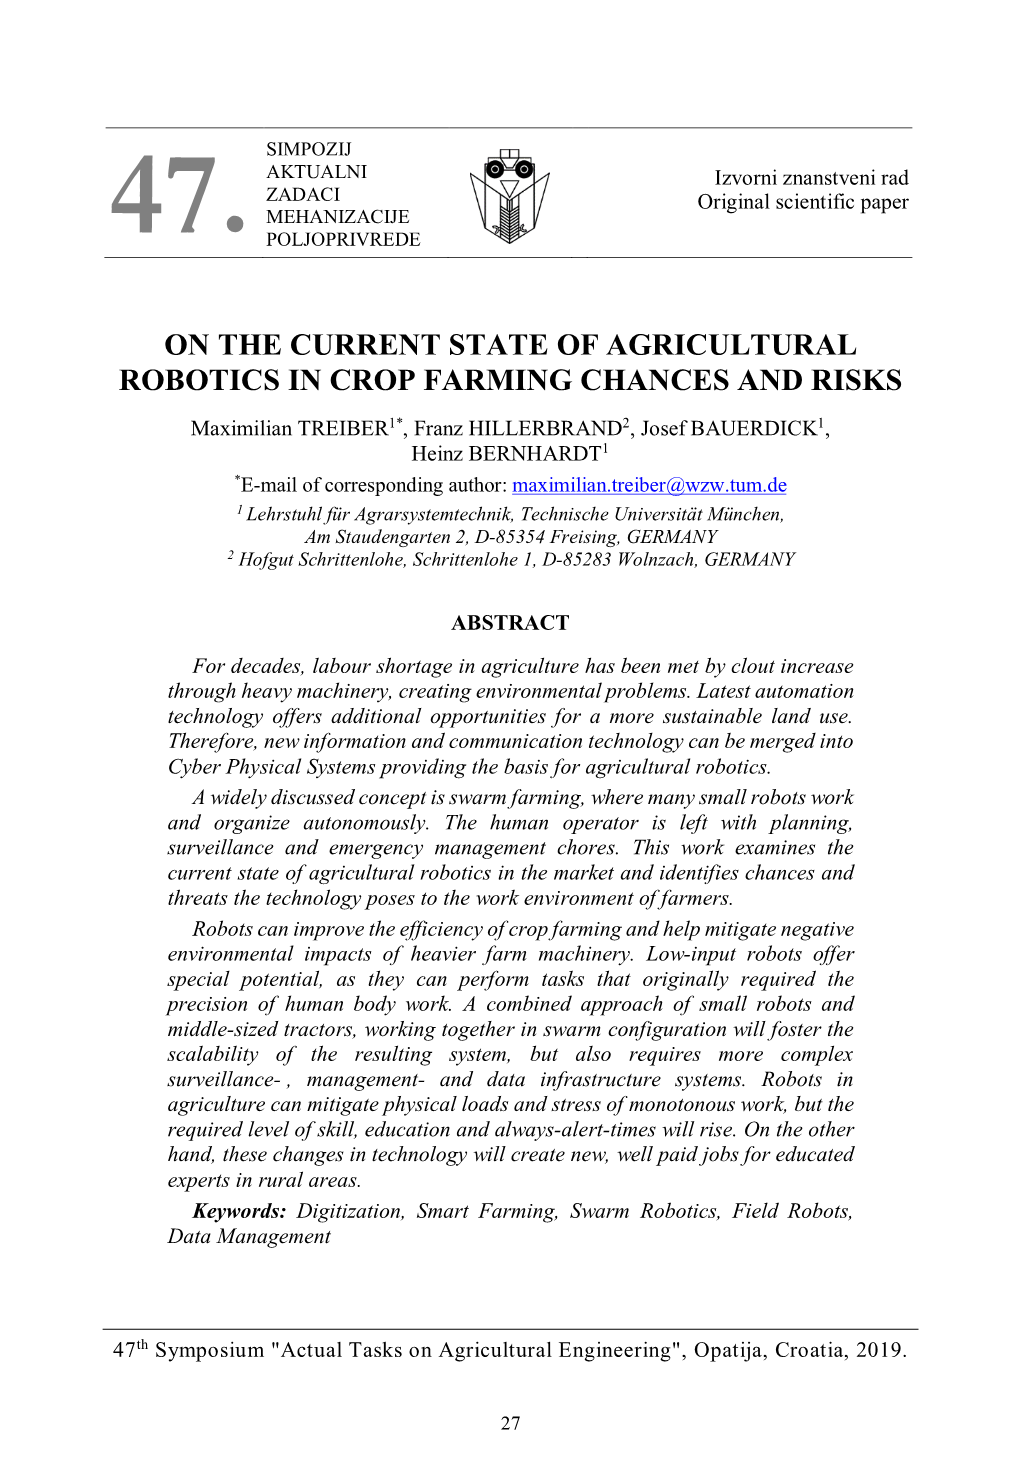 On the Current State of Agricultural Robotics In